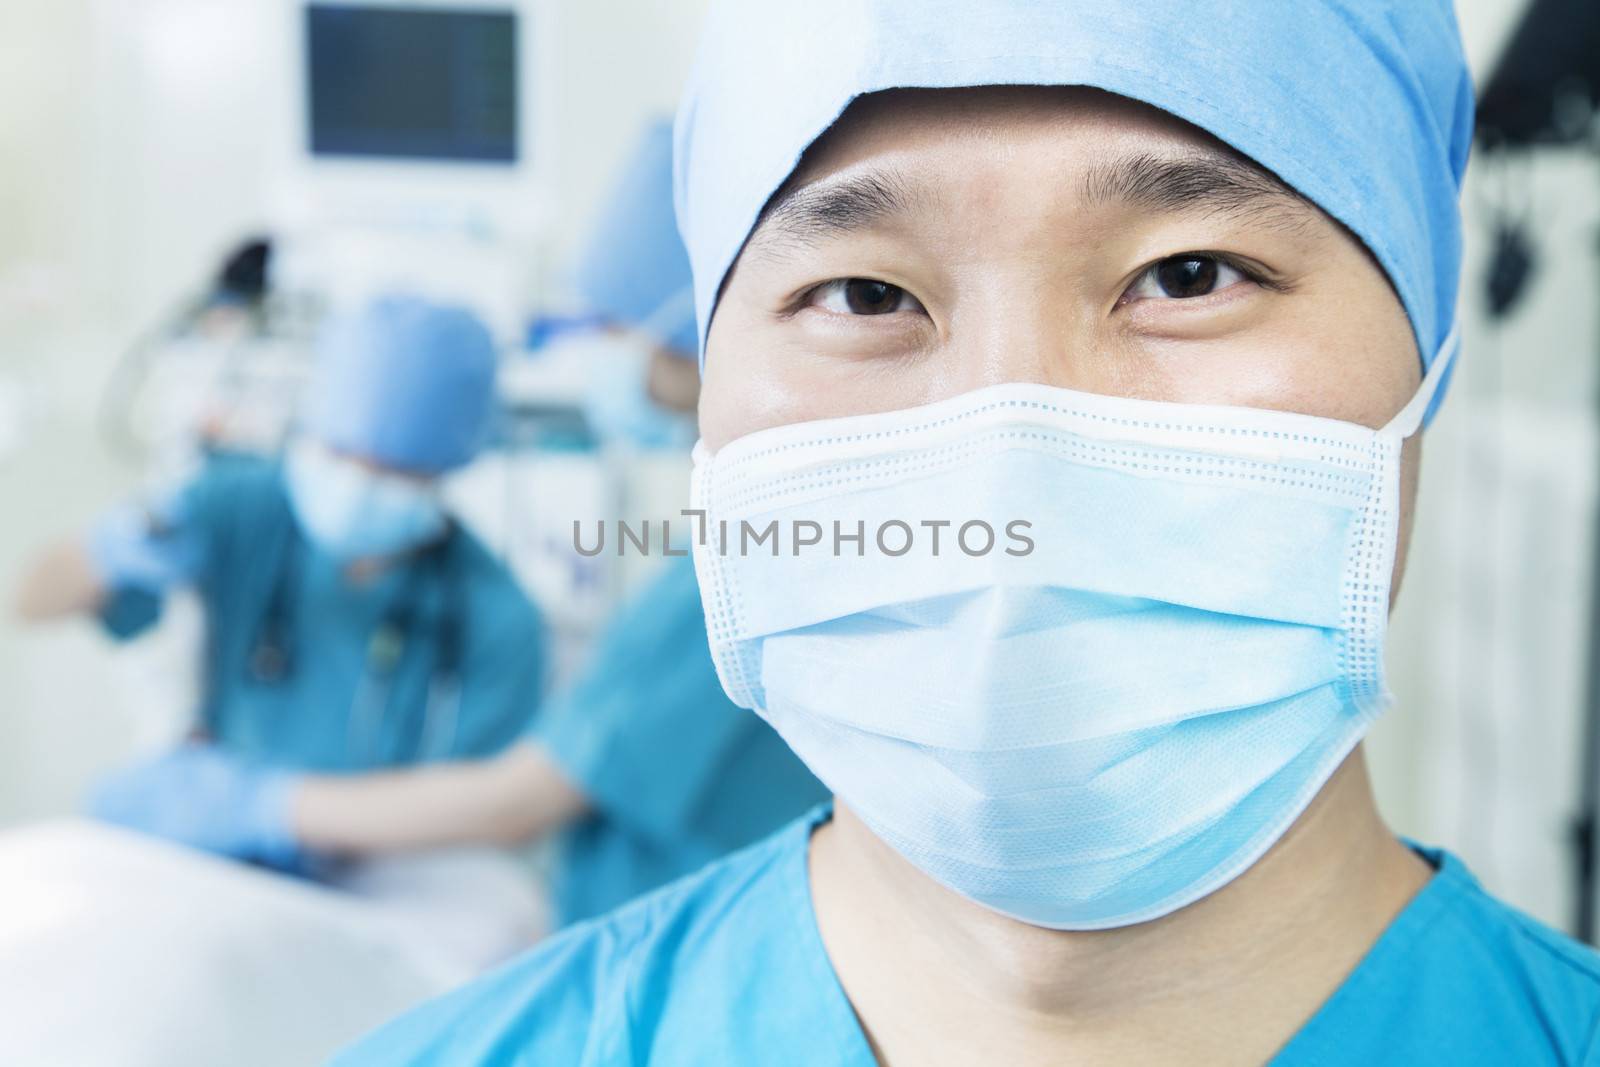 Portrait of surgeon wearing surgical mask in the operating room, close-up